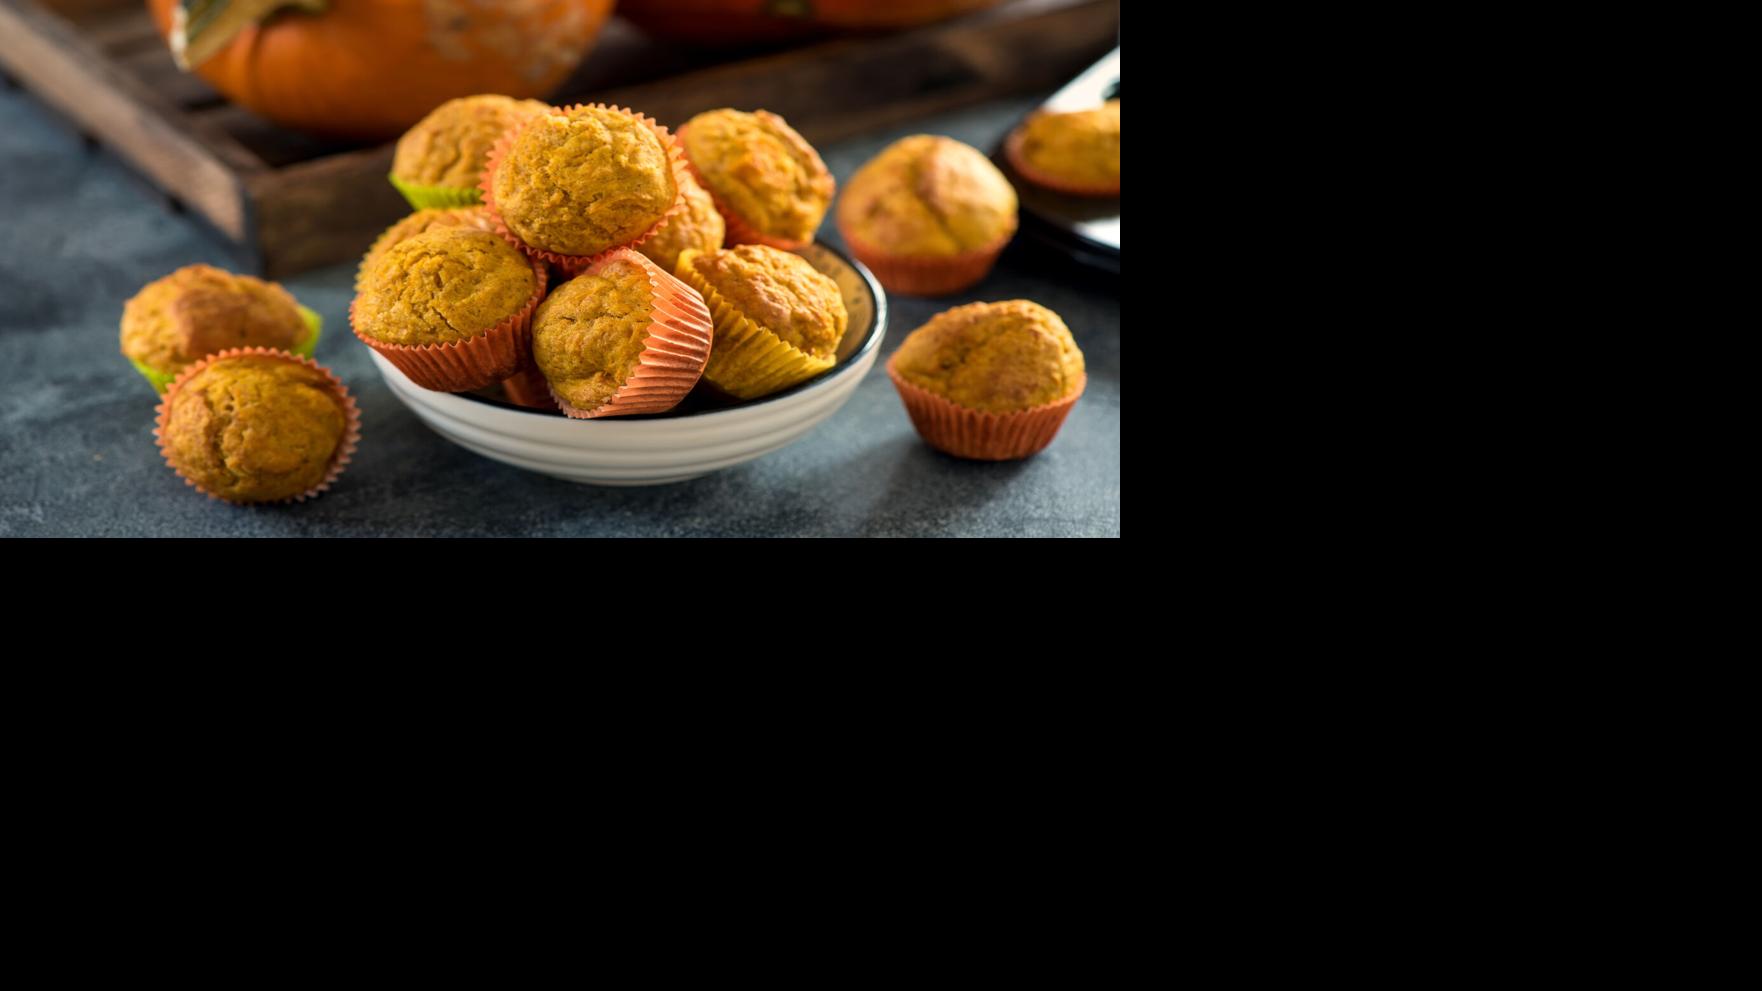 Round out your meal with sweet or savory pumpkin muffins